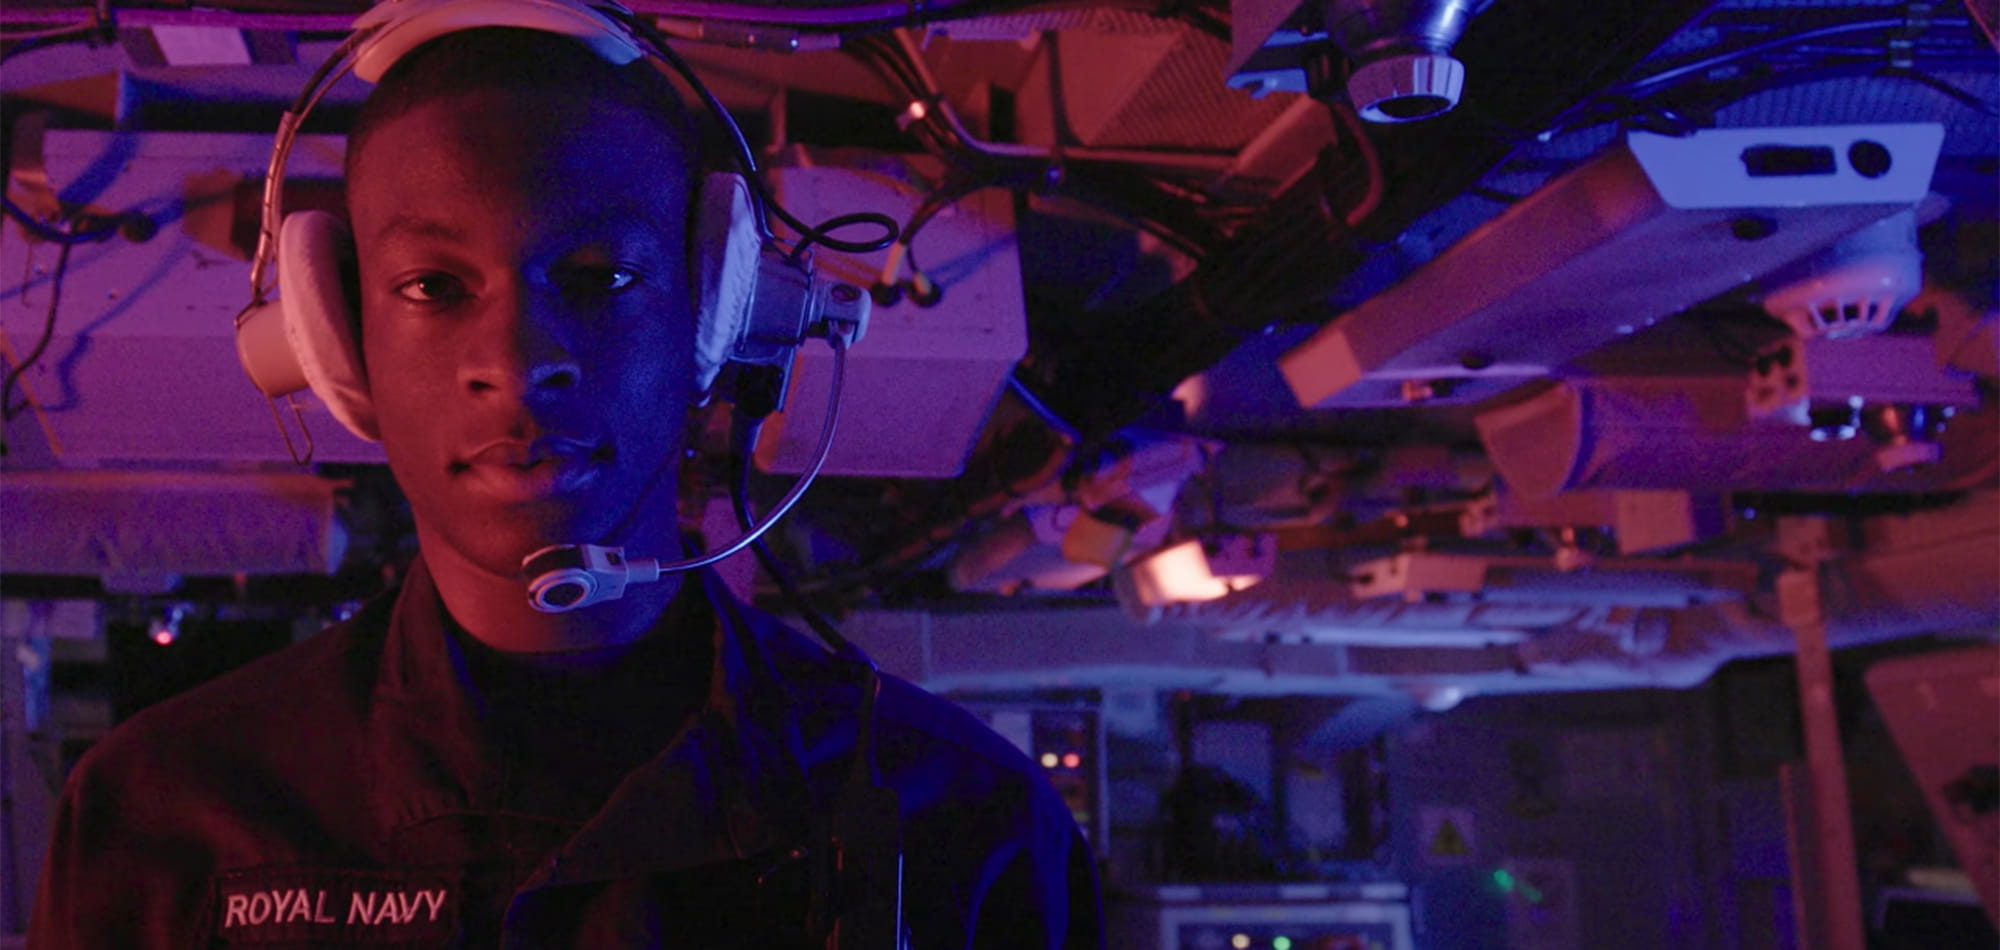 Royal Navy submariner wearing stands in a purple-lit control room